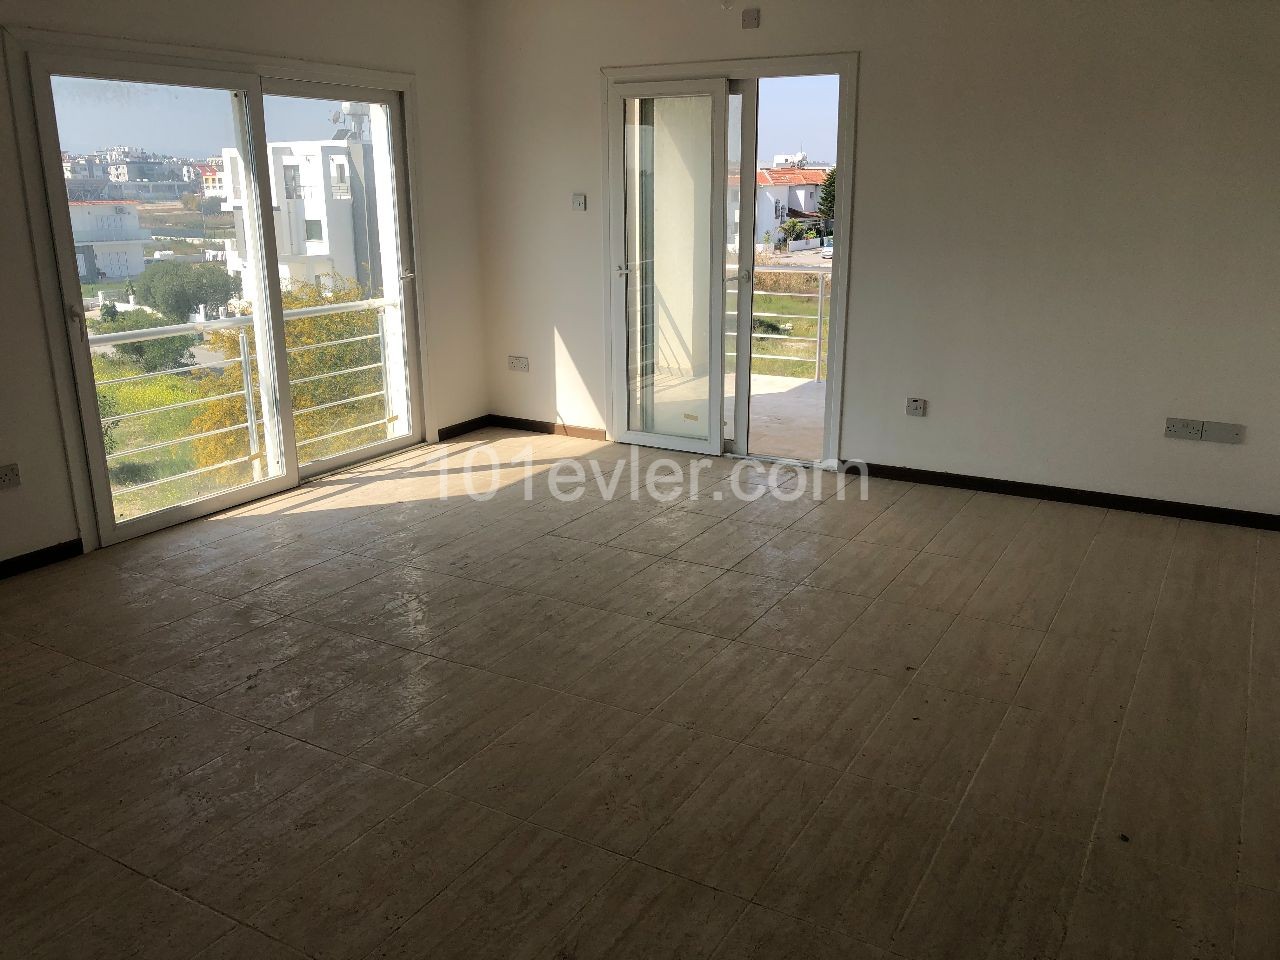 NICOSIA - 3+1 APARTMENTS FOR SALE IN THE SMALL DISTRICT OF KAYMAKLI VAKIFLAR TSARISI ** 